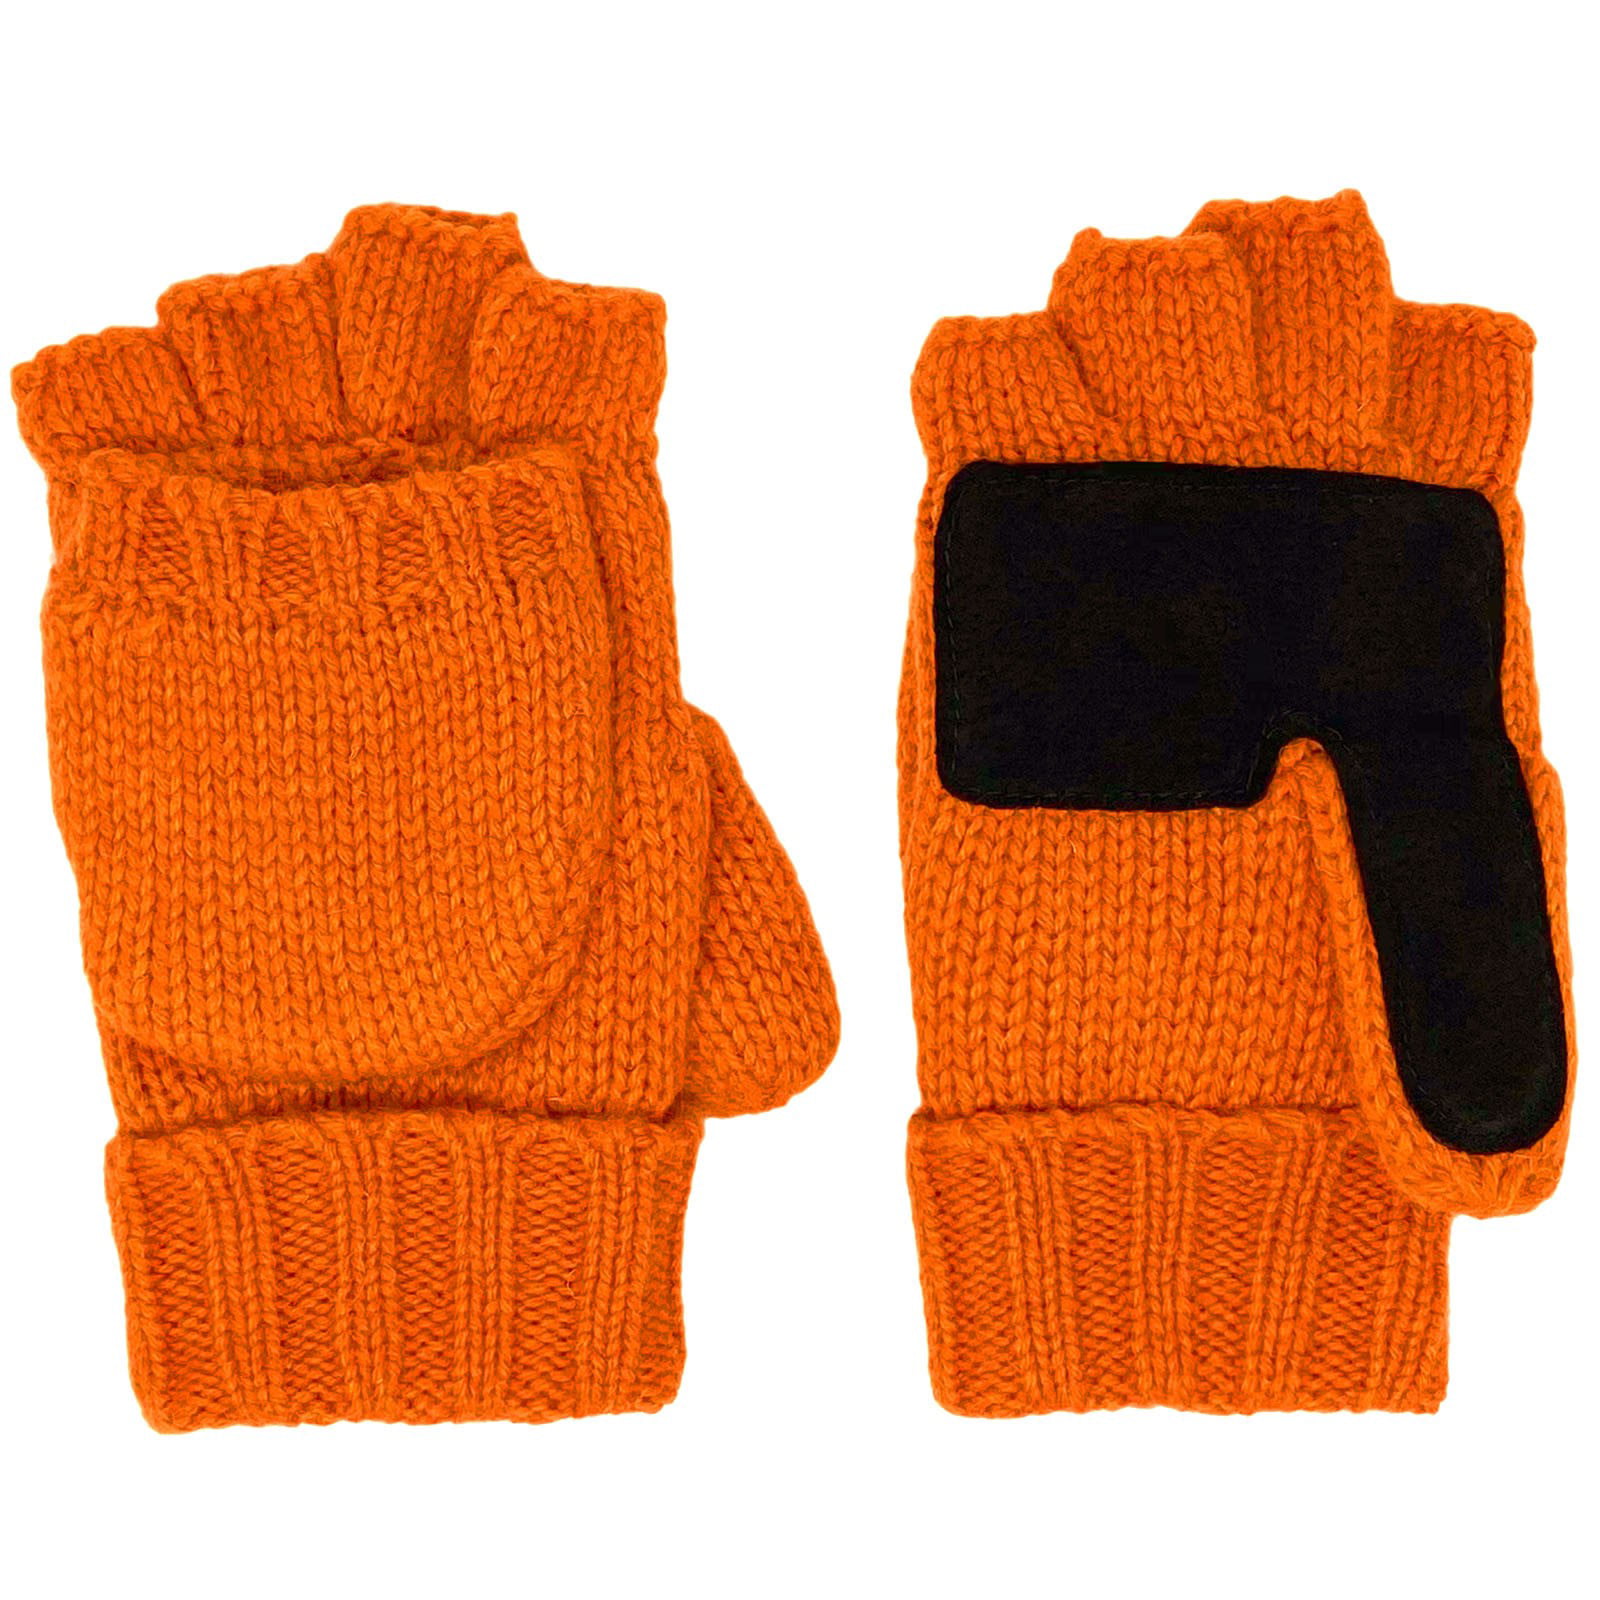 Color : Black bxvhry Mens Convertible Mittens Thinsulate Insulation Fleece Lined Warm Knit Half Fingerless Gloves with Mitten Cover